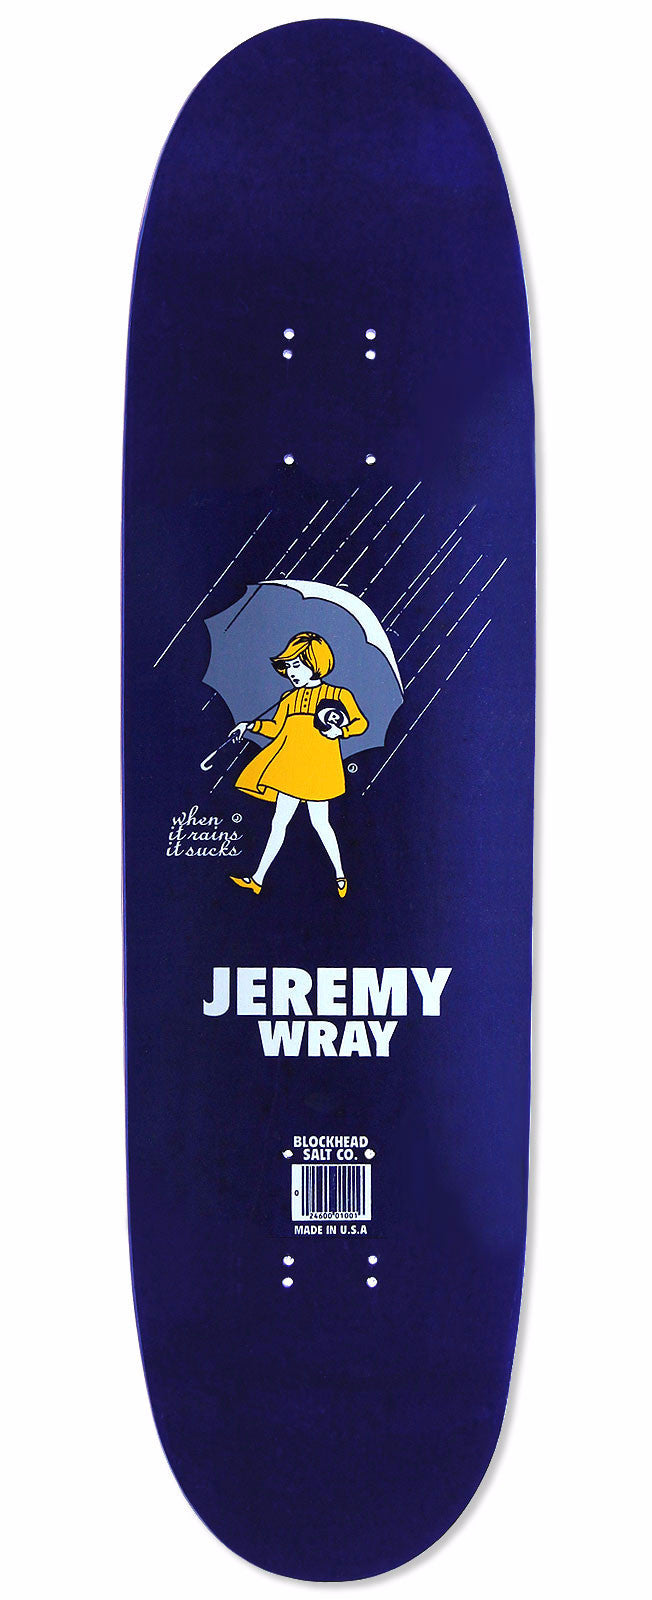 Jeremy Wray Rain Girl, Signed & #'d Reissue - SOLD OUT